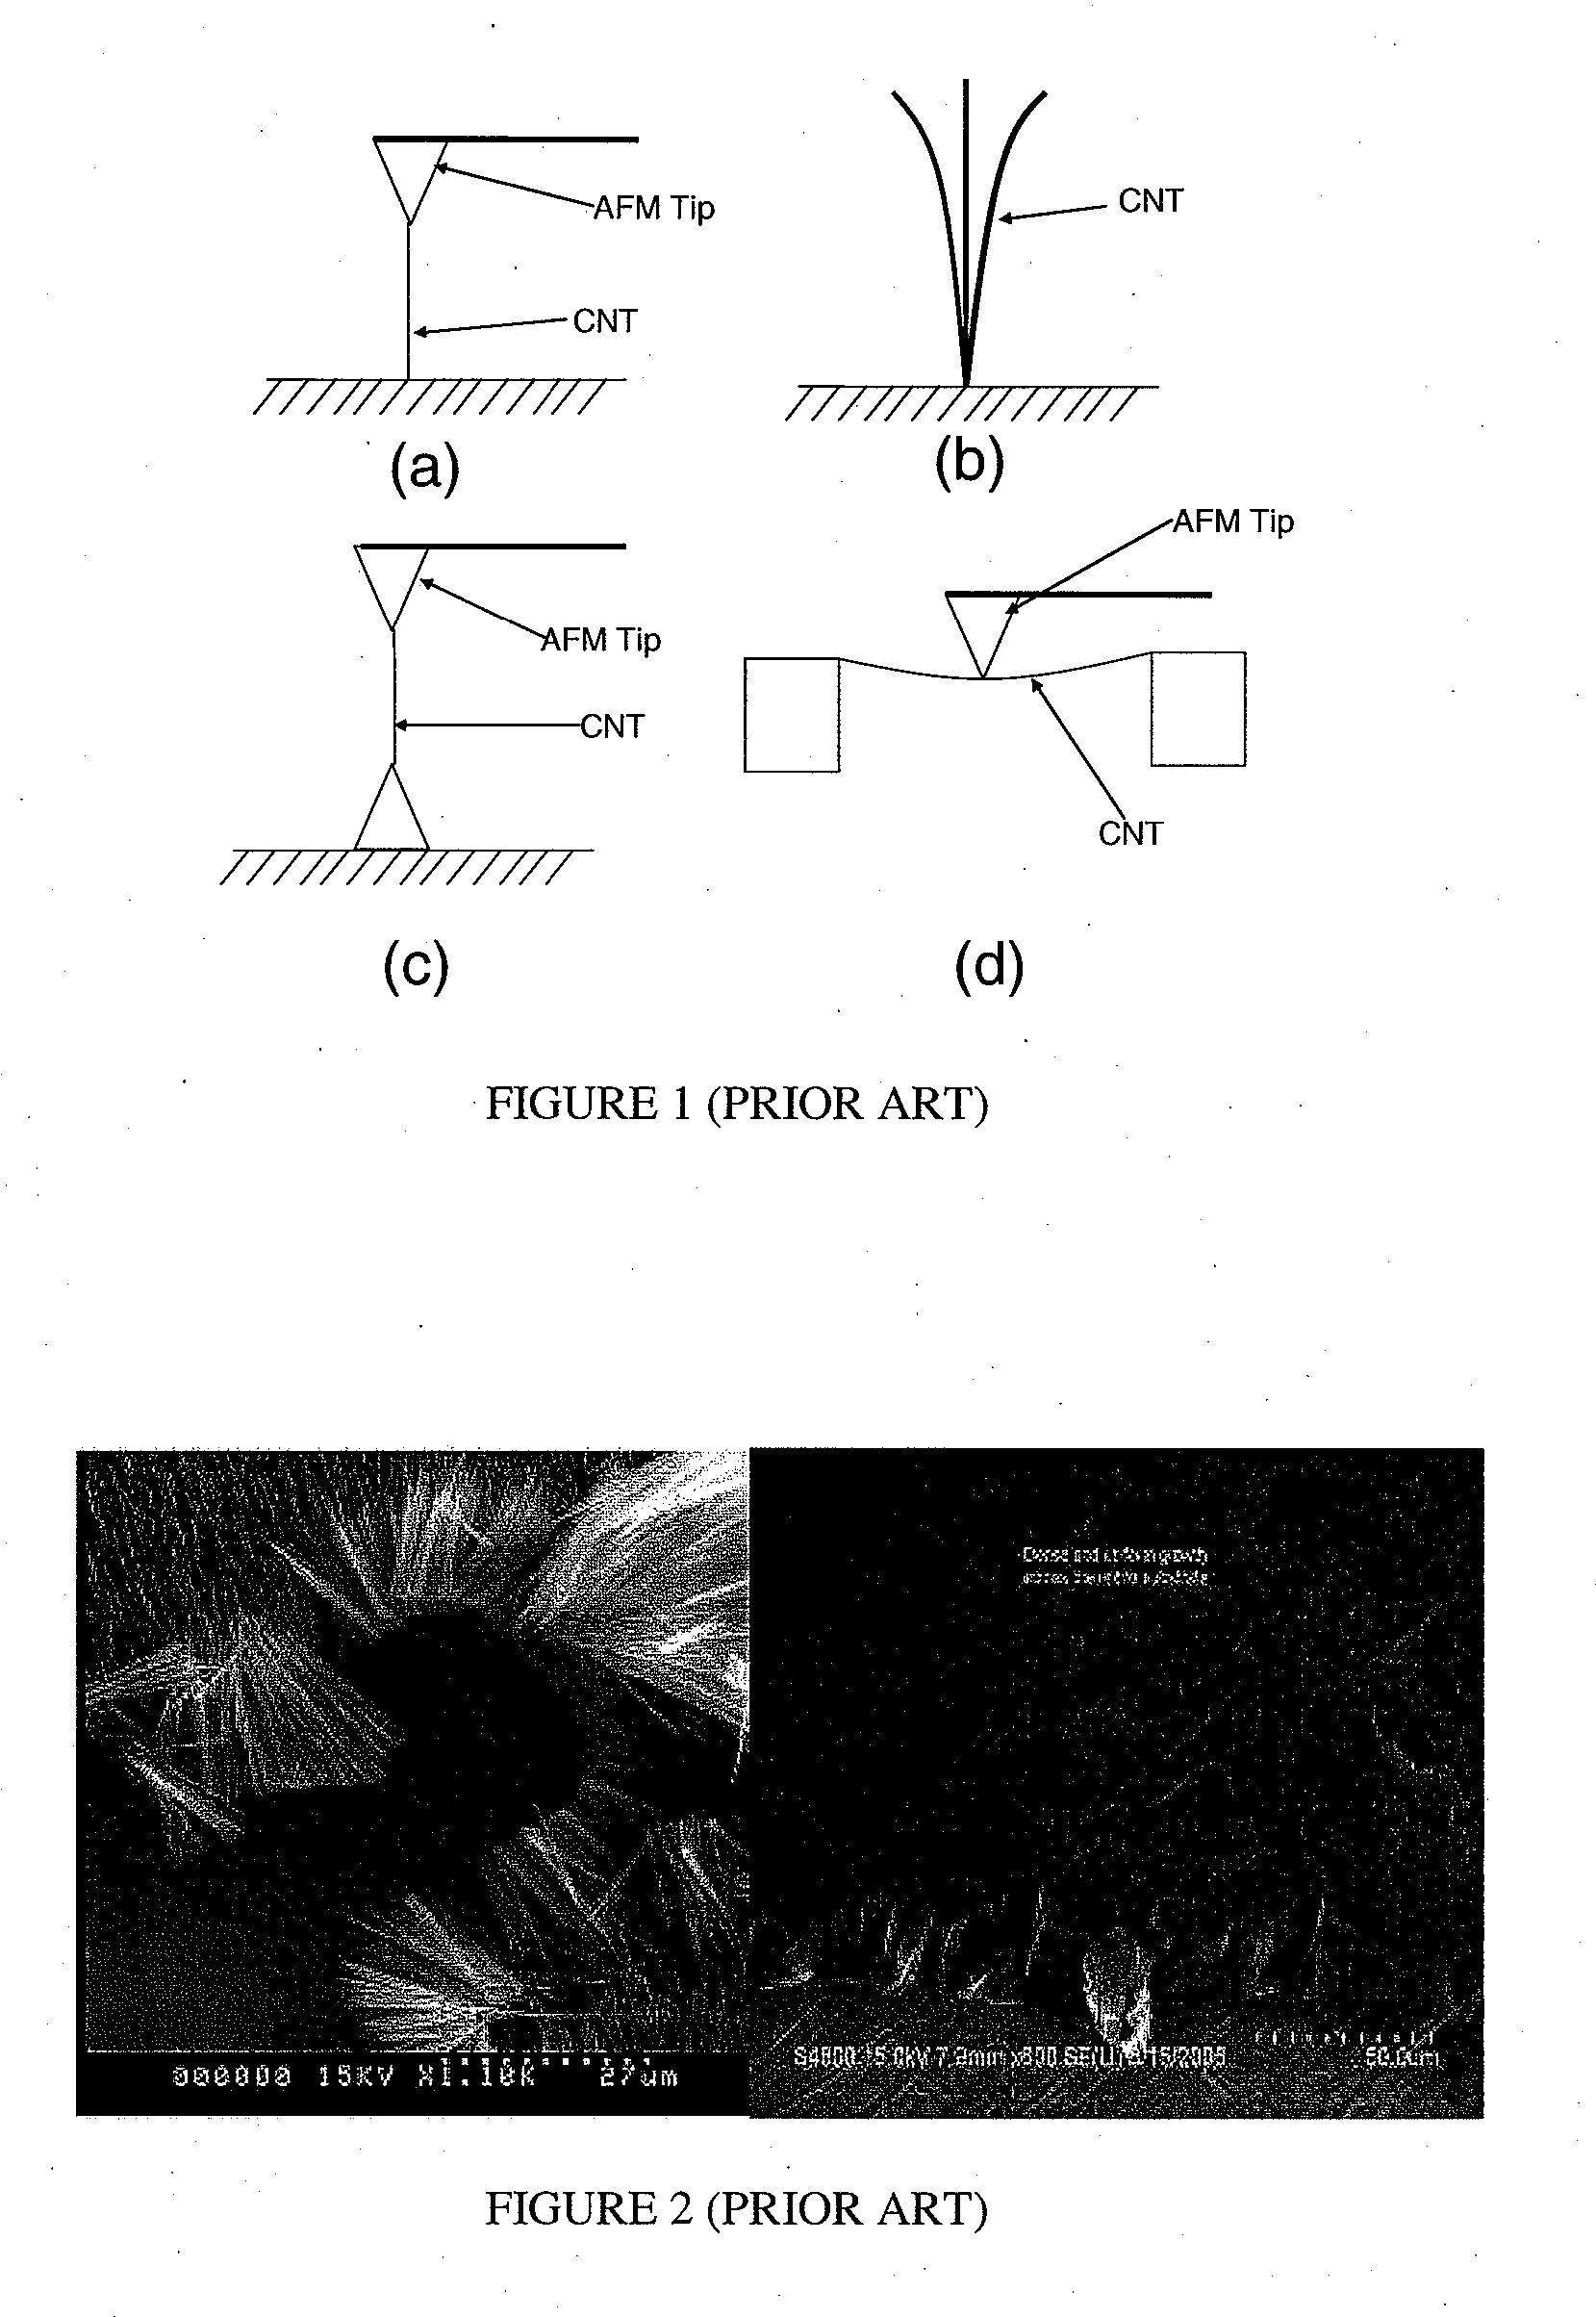 Method and Apparatus for Evaluation and Improvement of Mechanical and Thermal Properties of CNT/CNF Arrays